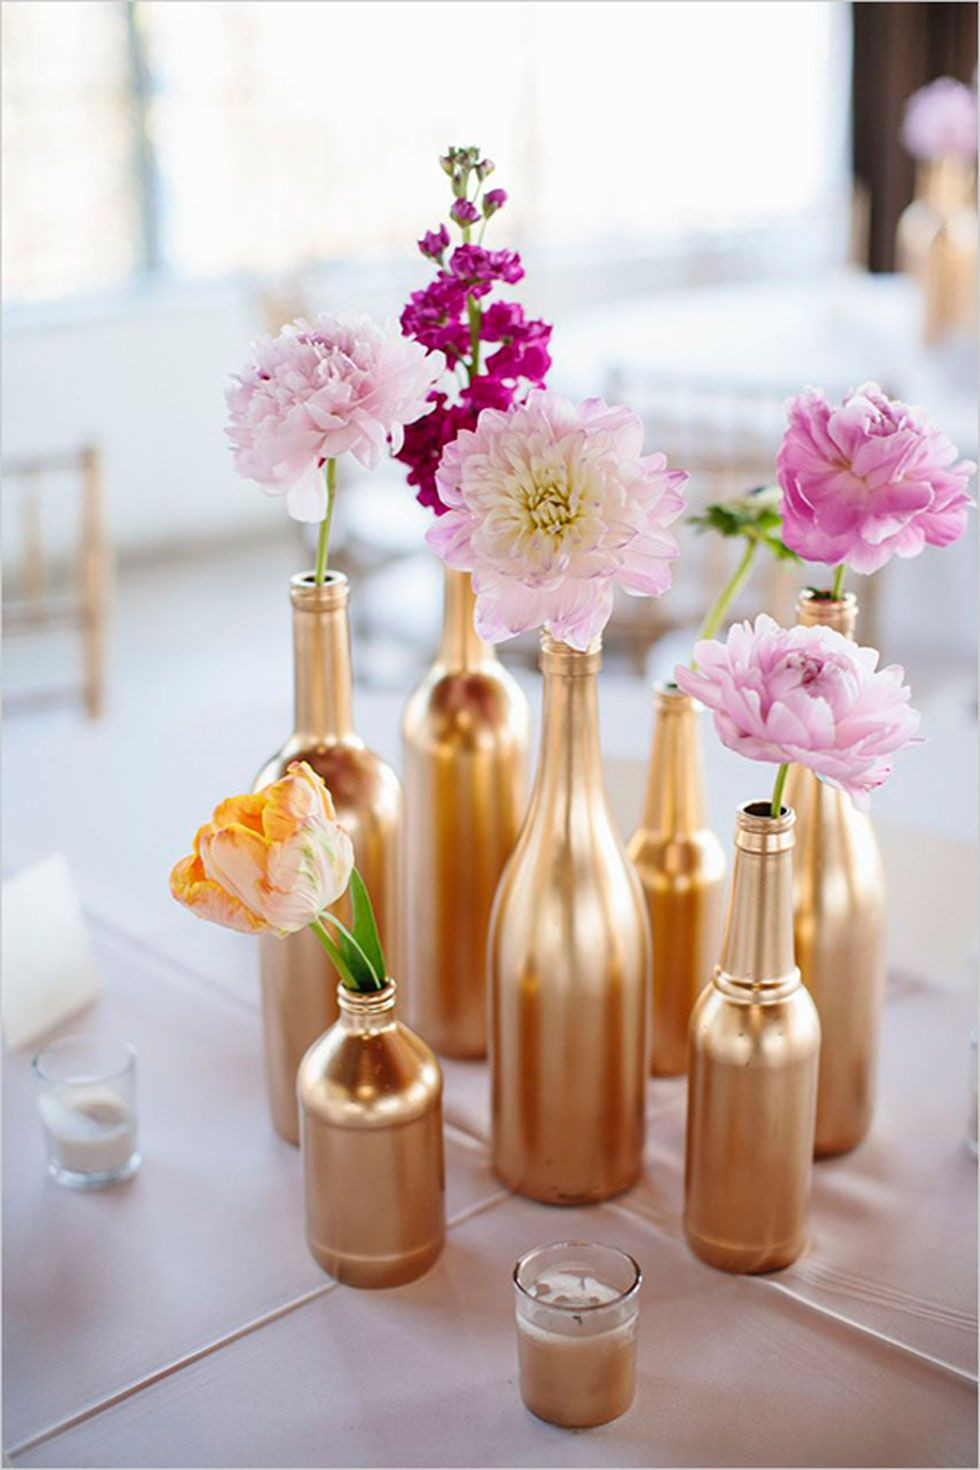 22 Stunning Milk Bottle Flower Vases 2024 free download milk bottle flower vases of 55 creative bridal shower ideas that are as special as the bride to within these spray painted glass bottles look gorgeous as simple vases for individual blossoms